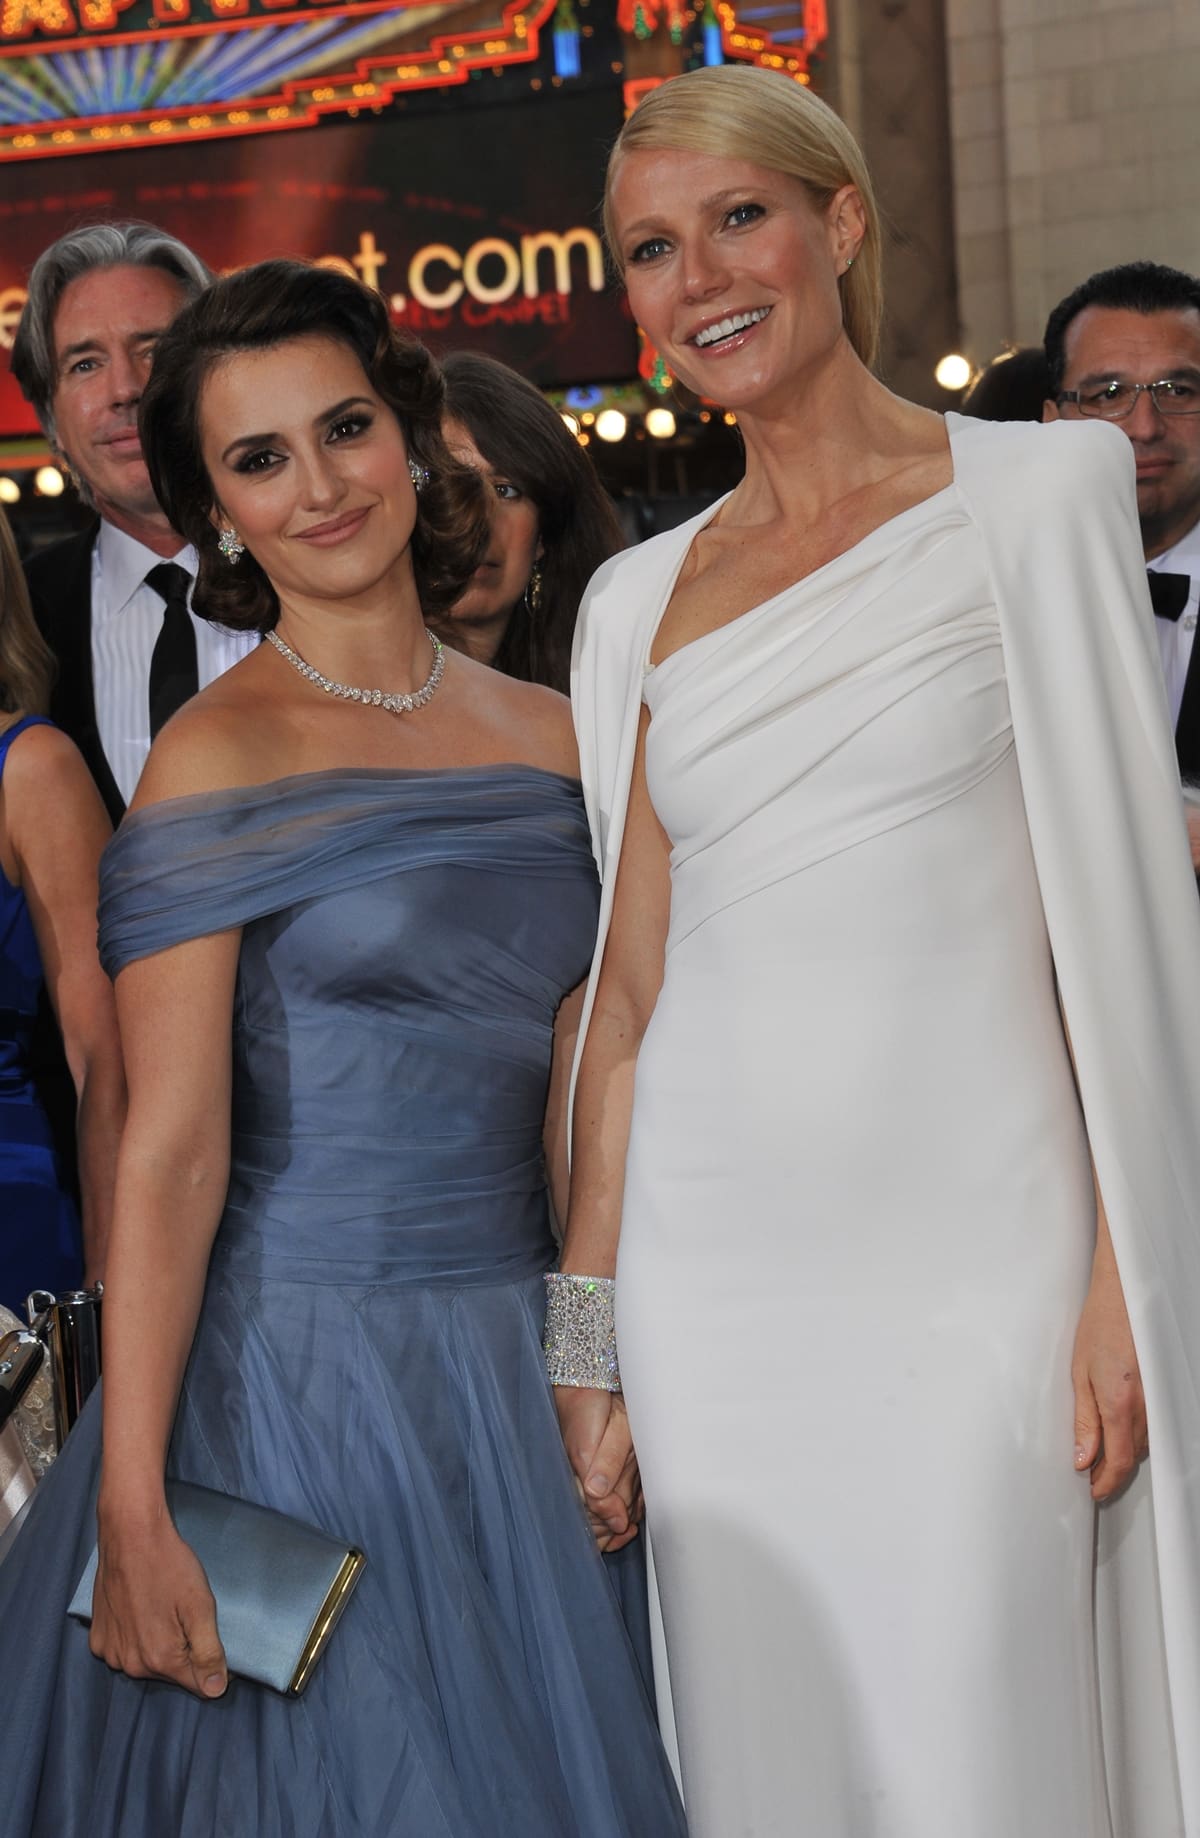 Penélope Cruz is approximately 5 inches shorter than Gwyneth Paltrow, with Cruz standing at 5 feet 4 inches (162.6 cm) and Paltrow at 5 feet 9 inches (175.3 cm)